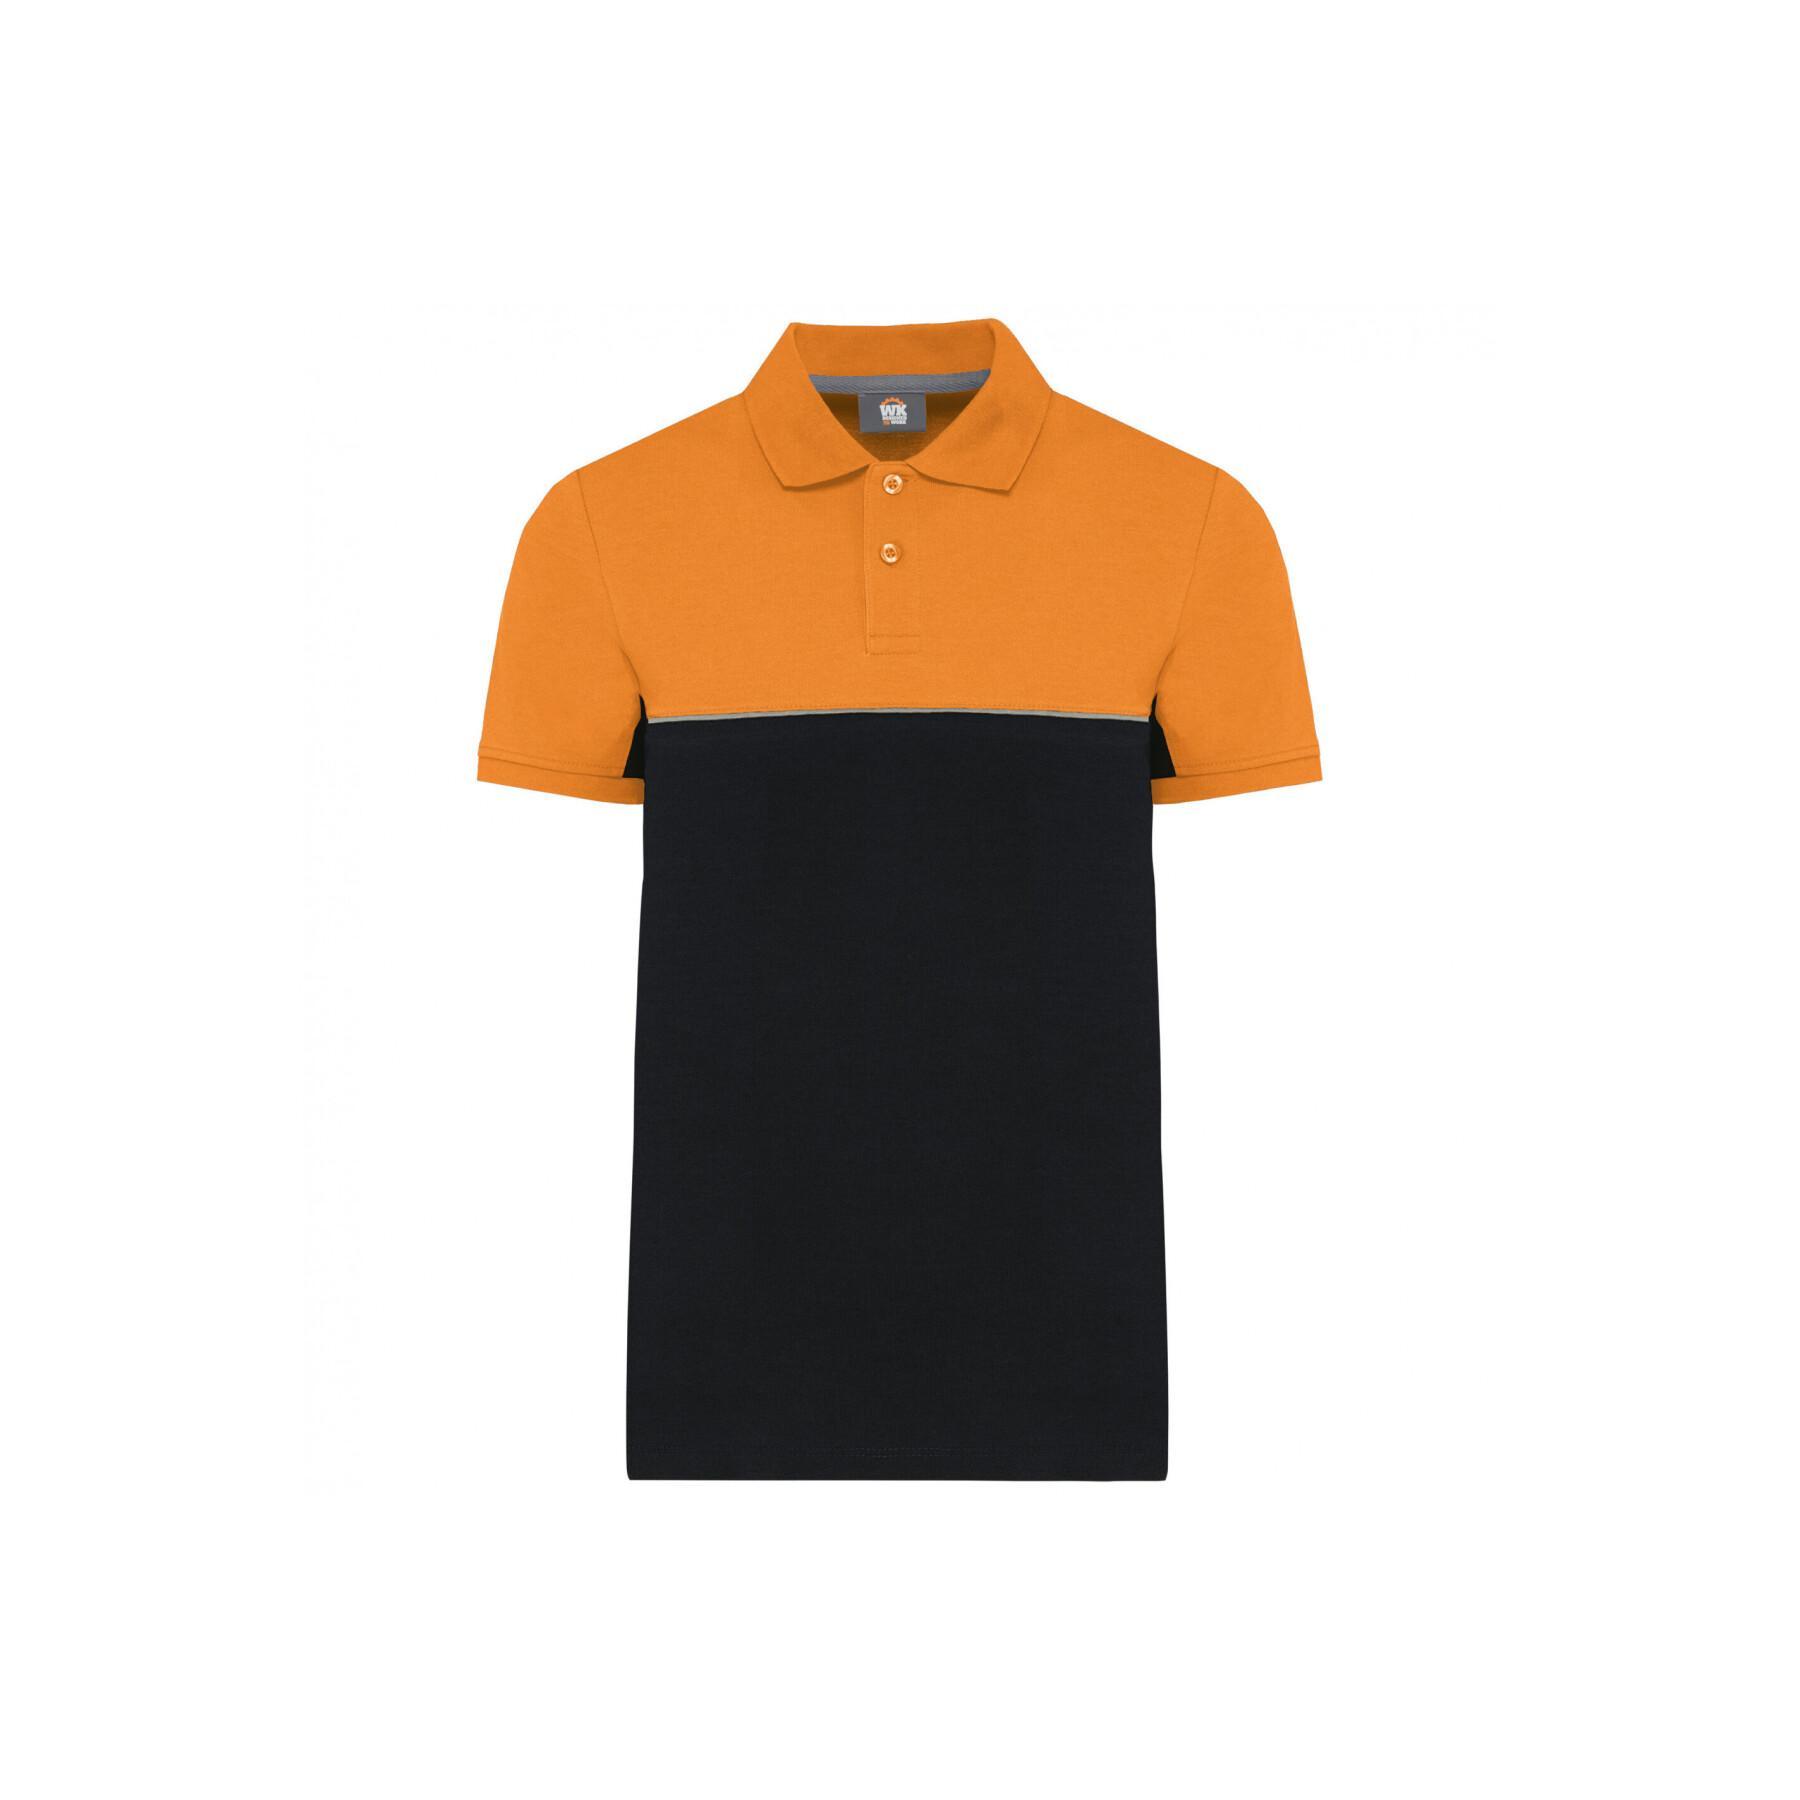 Two-tone polo WK. Designed To Work